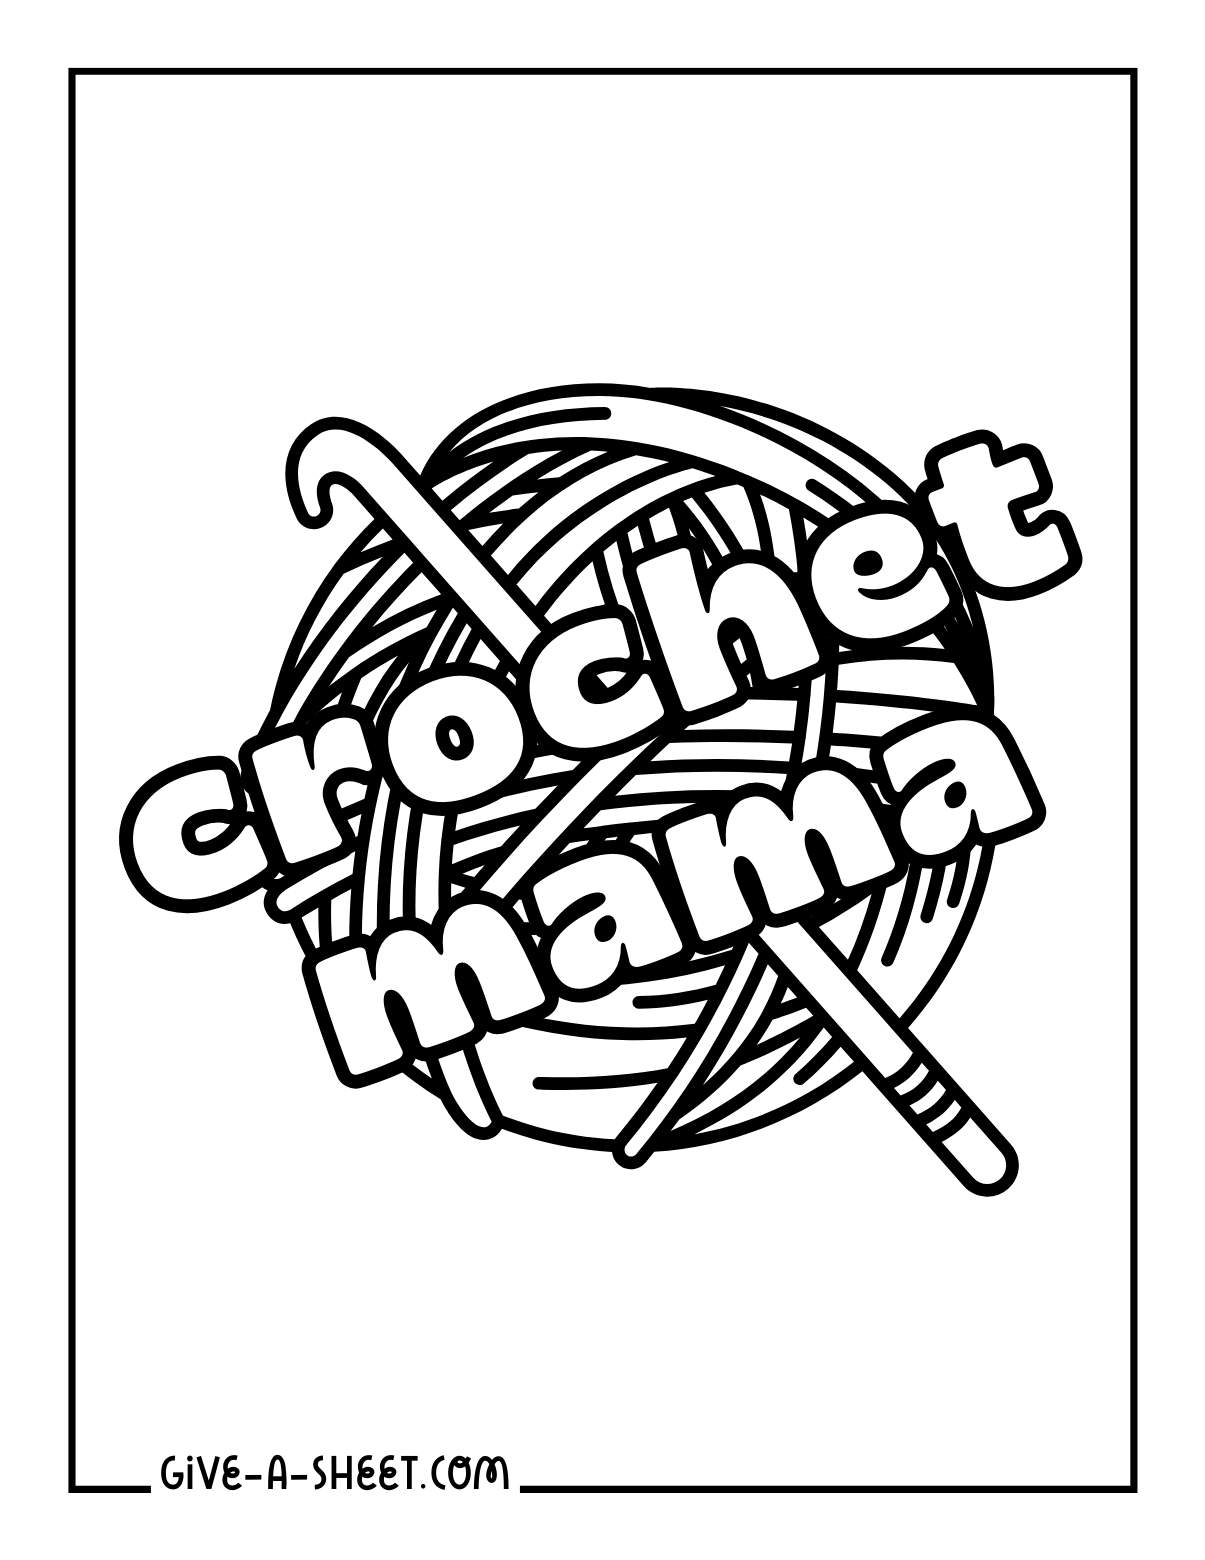 Crochet tapestry needle and yarn coloring page for women.